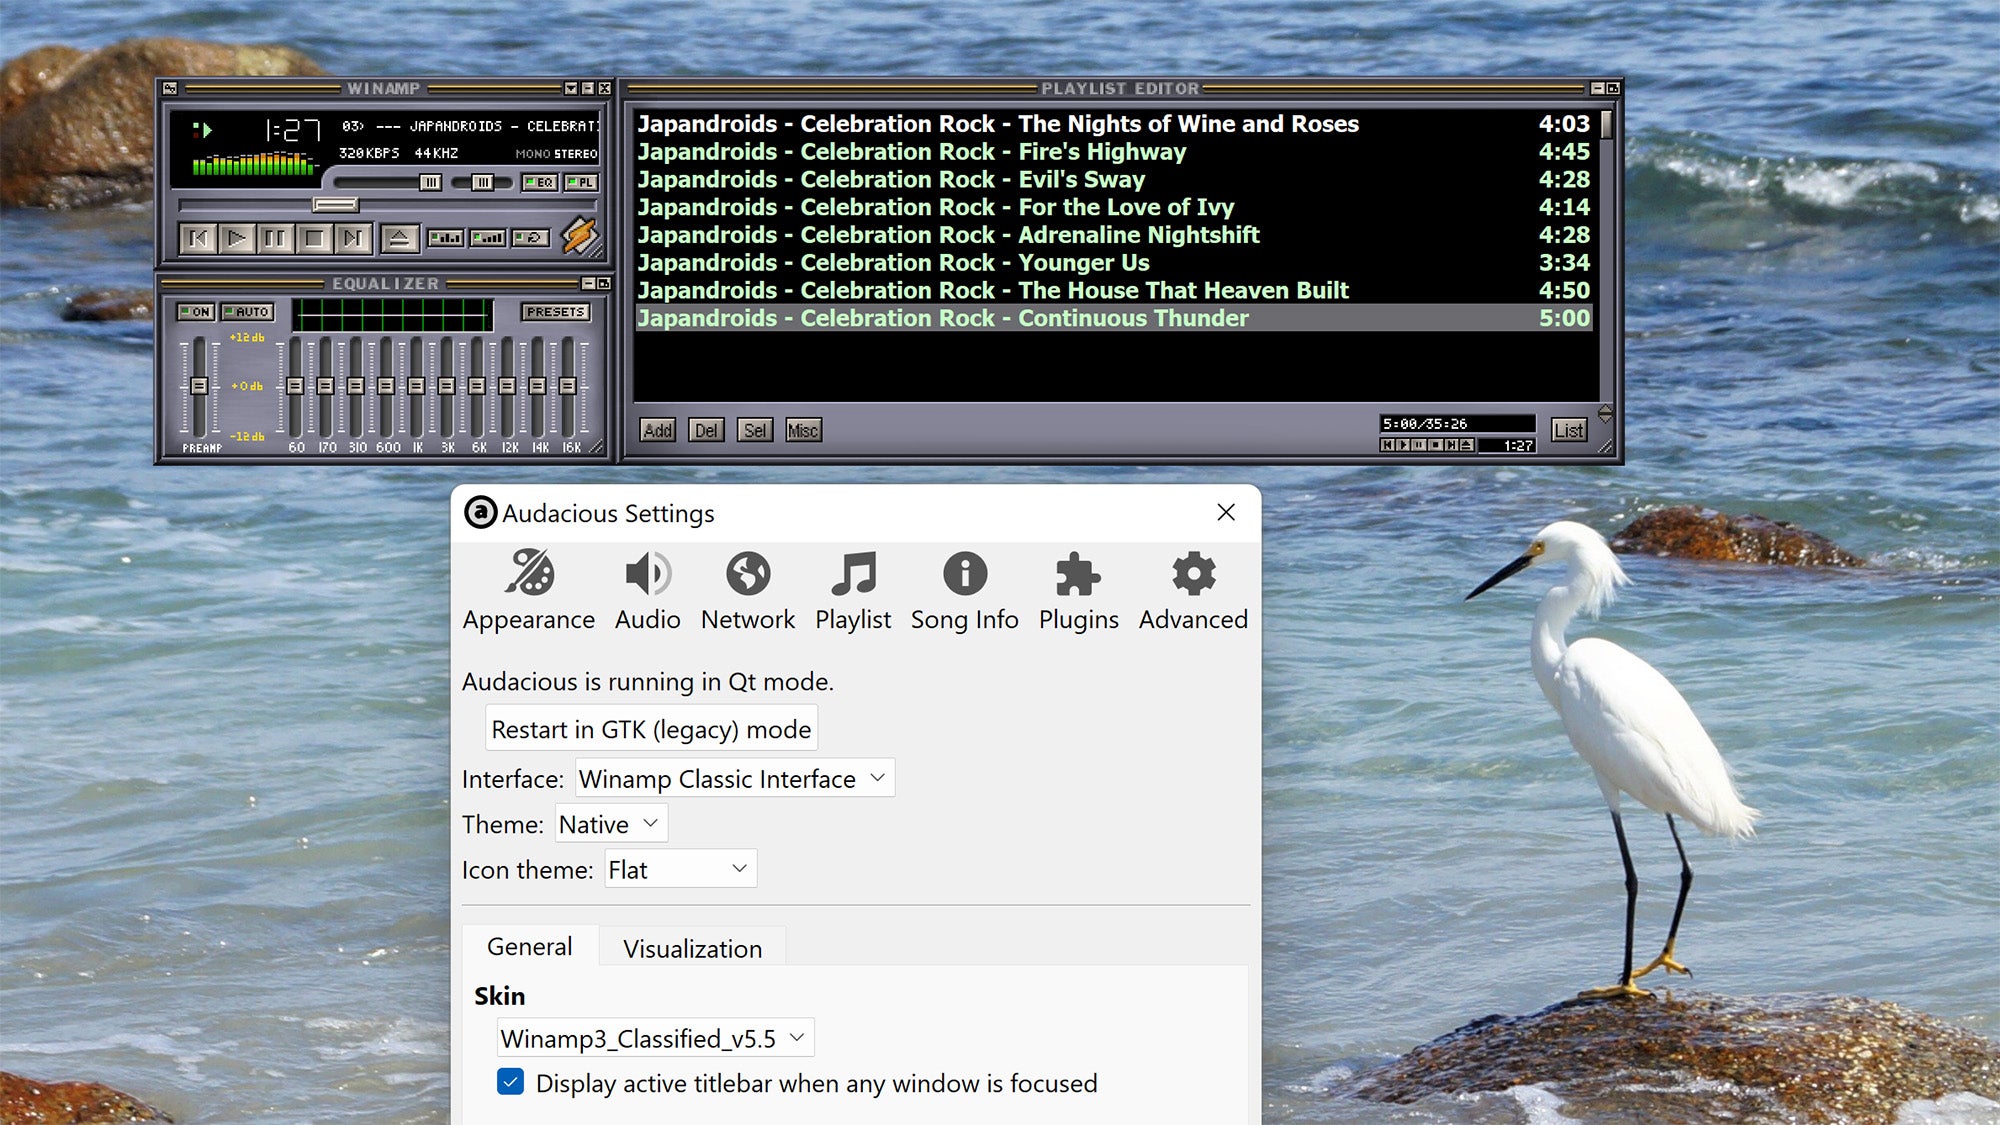 windows-screen-using-audacious-with-a-winamp-skin-to-play-music